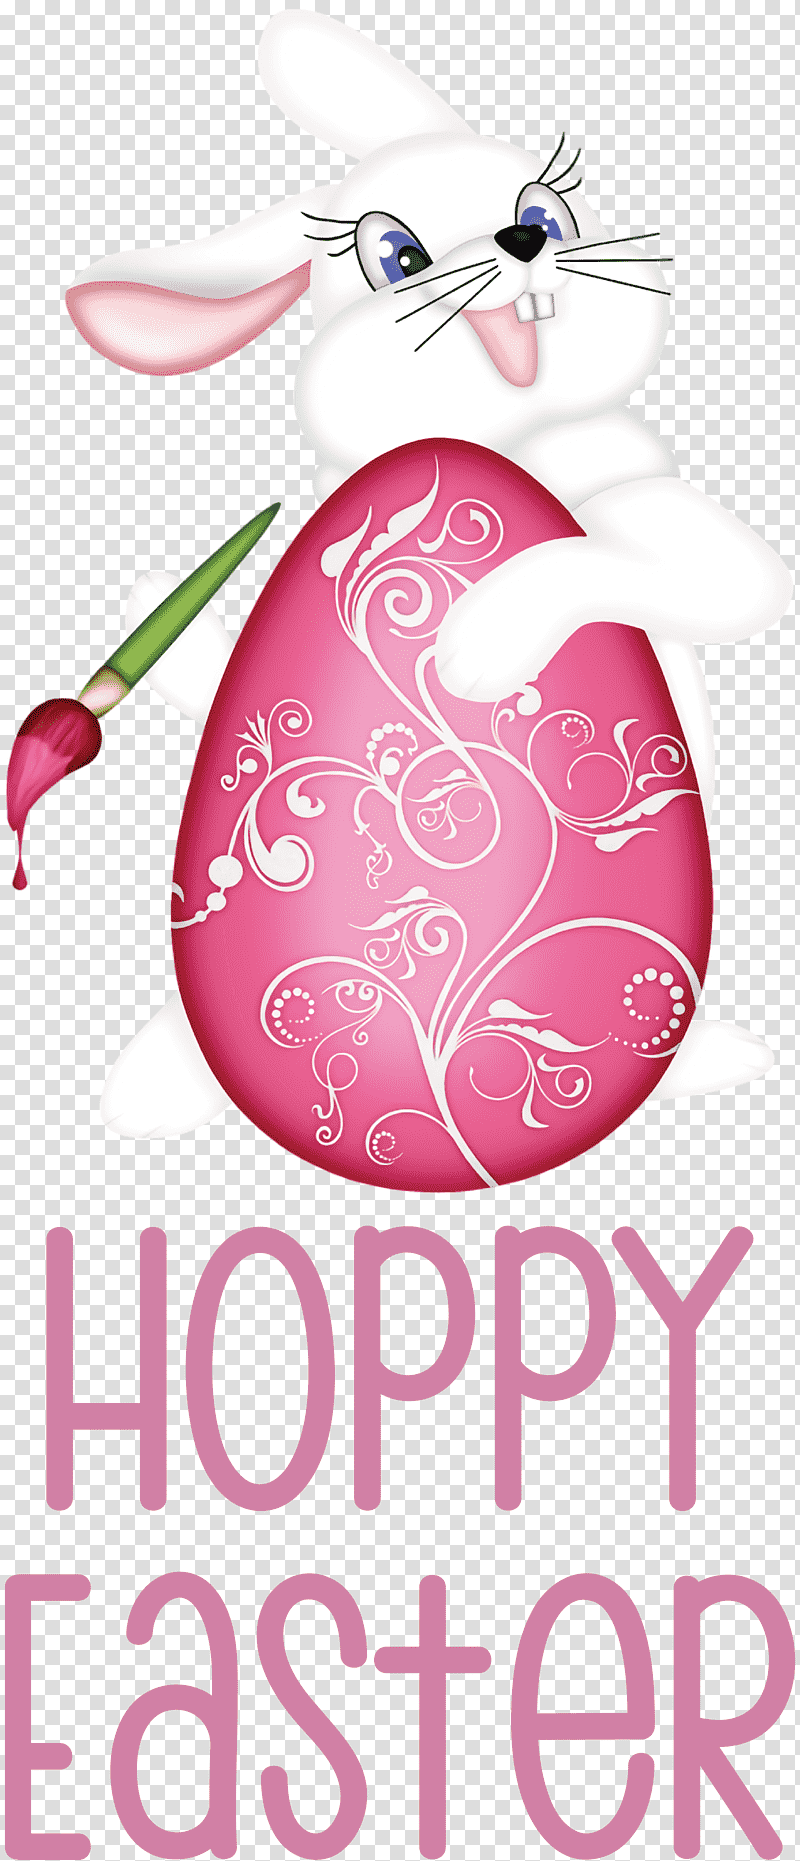 easy easter basket drawing - Clip Art Library